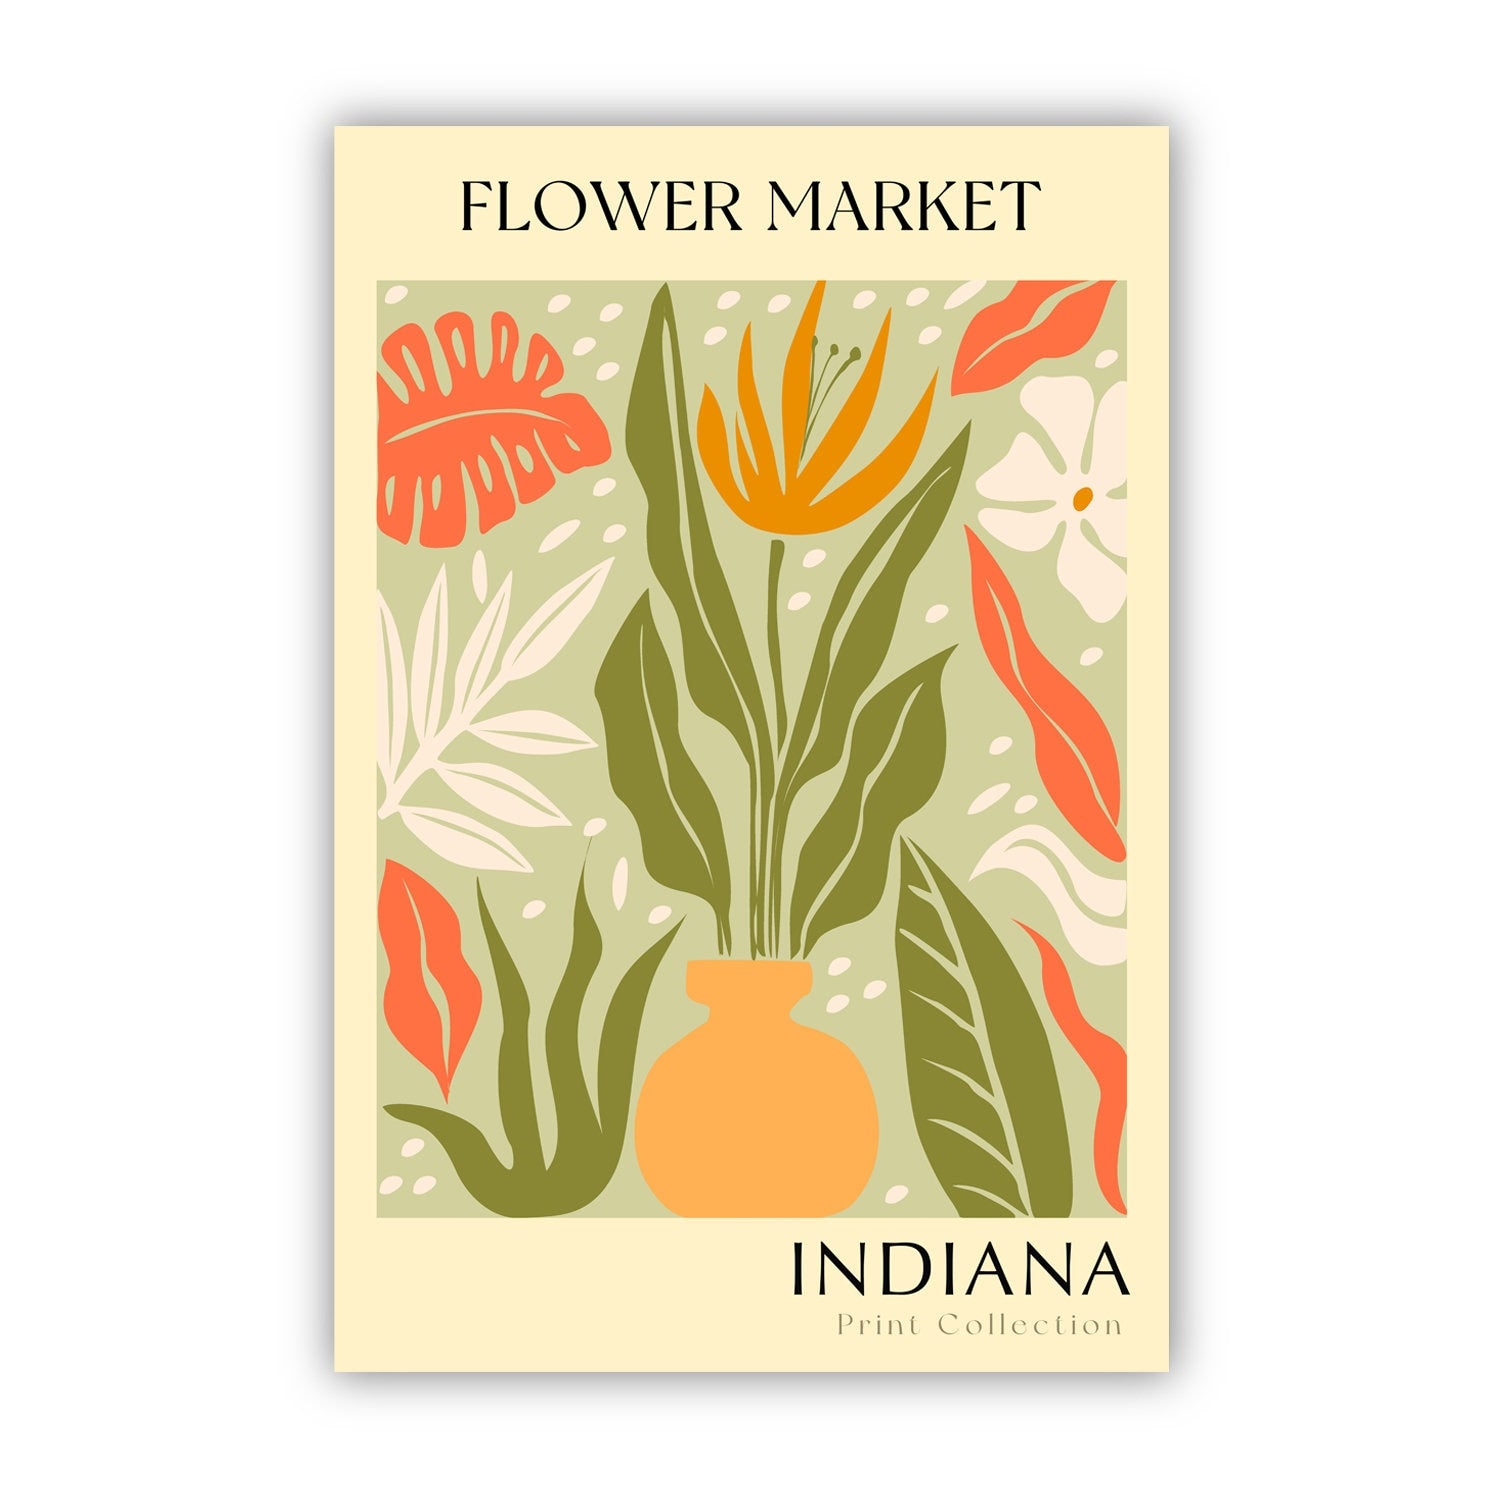 Indiana State flower print, USA states poster, Indiana flower market poster, Botanical posters, Nature poster artwork, Boho floral wall art